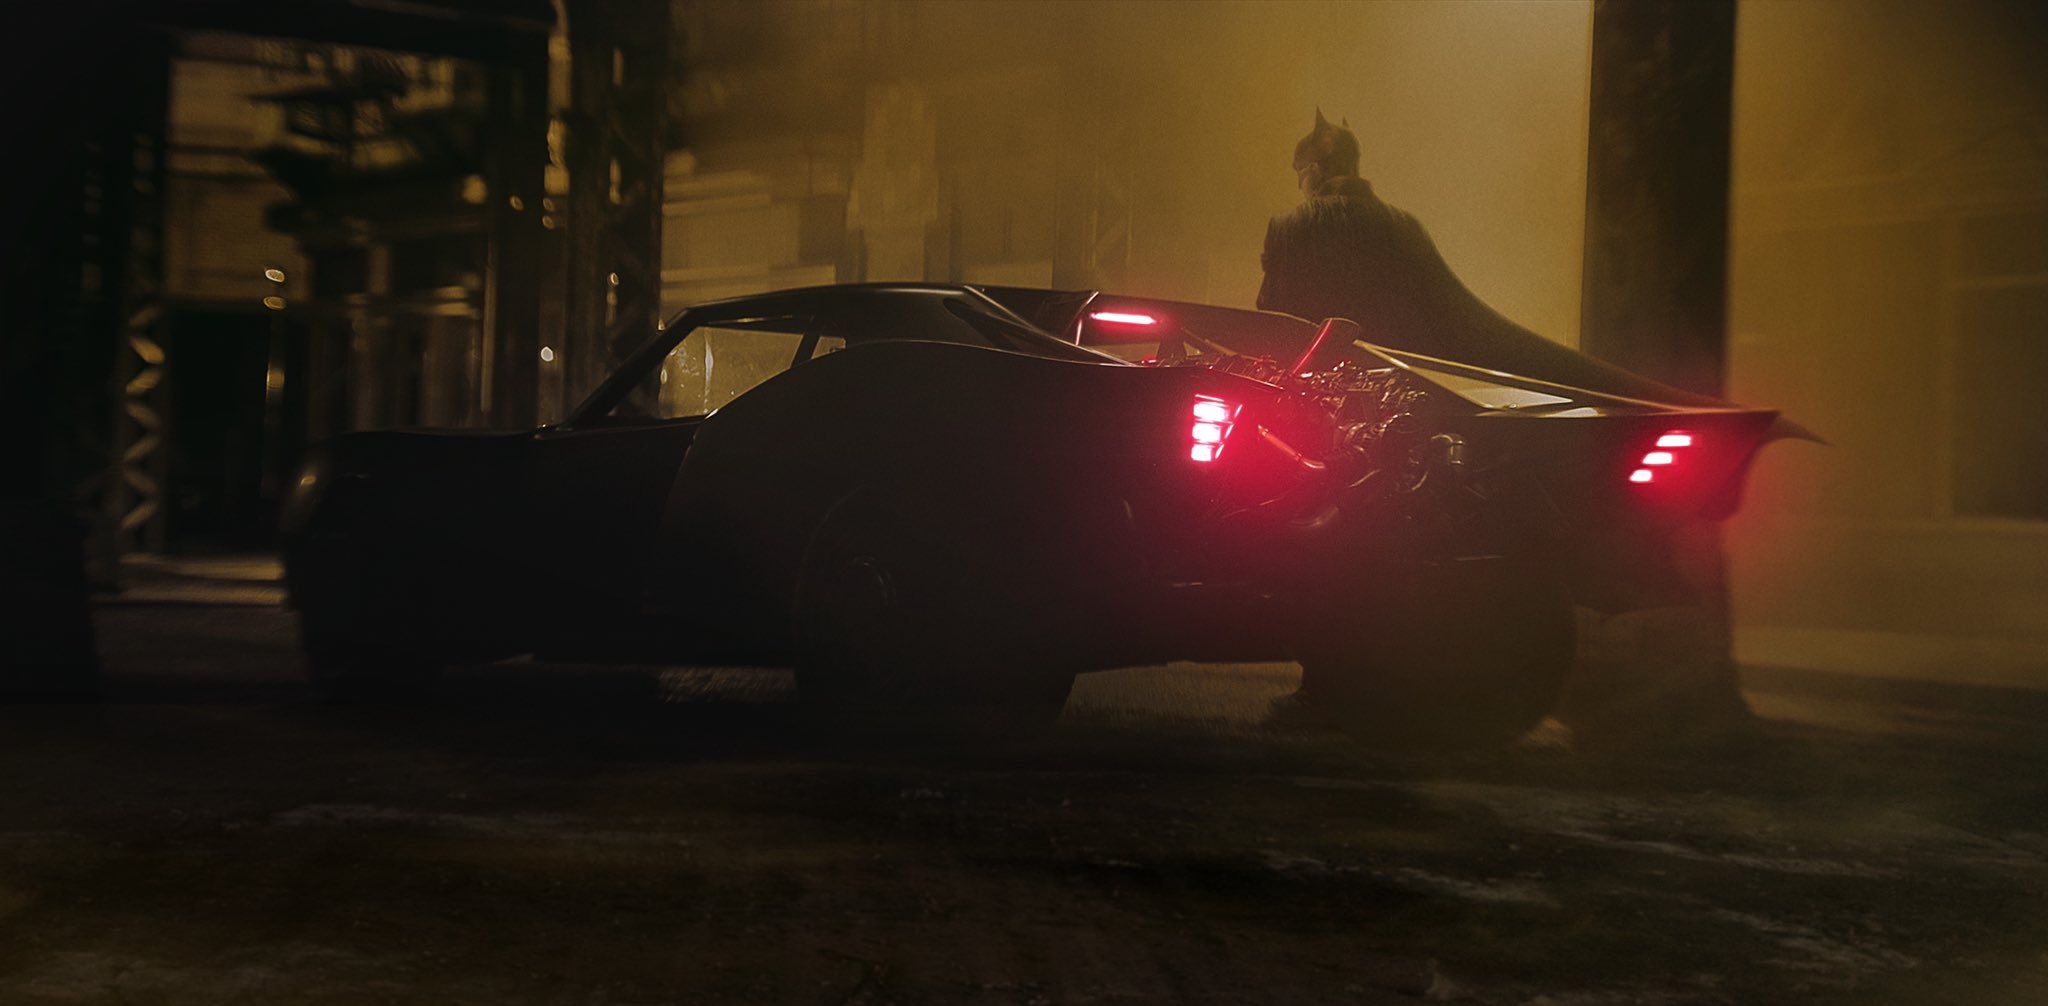 Here's a First Look at the New Batmobile, and It's Badass